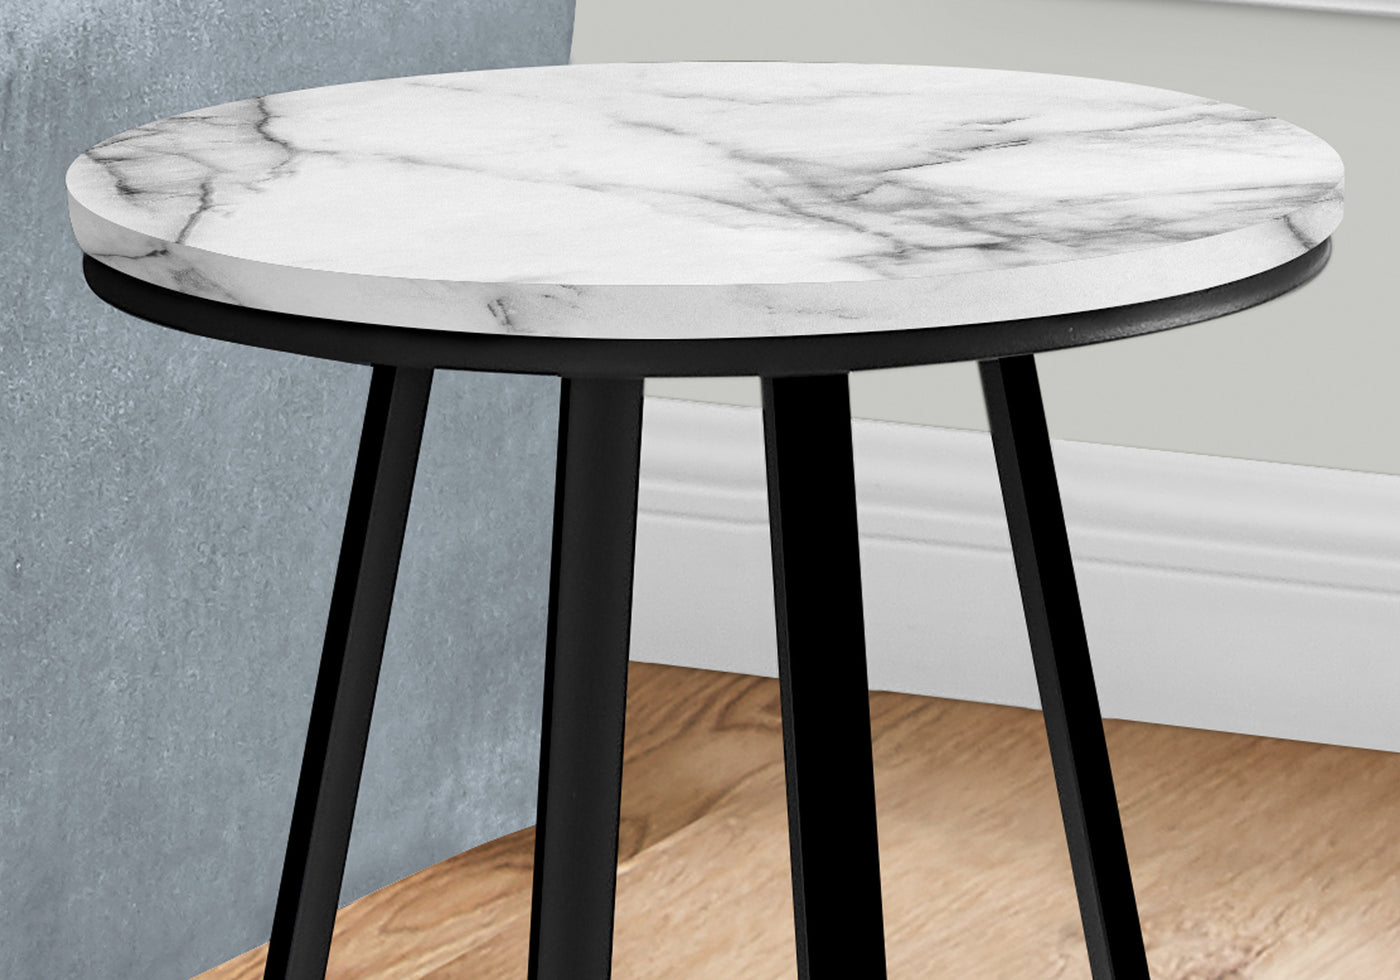 22" Black And White Faux Marble Round End Table